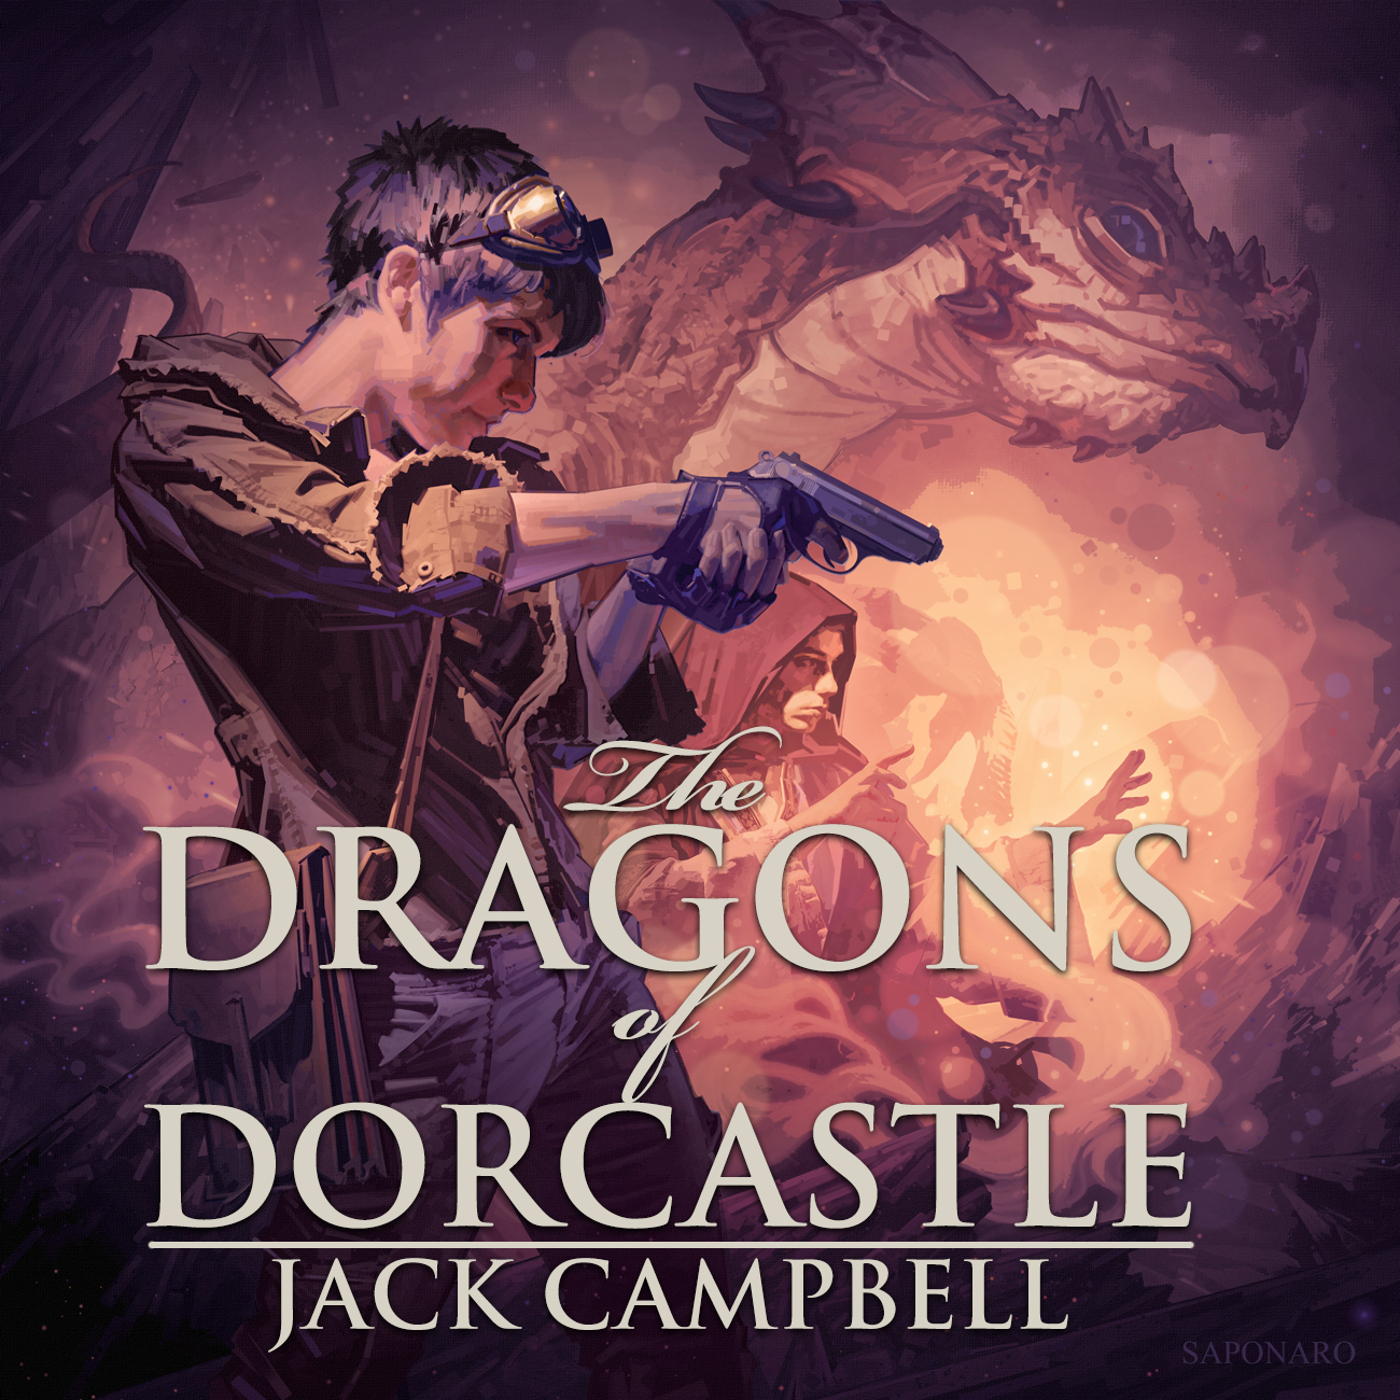 The Dragons of Dorcastle (2015) by Jack Campbell